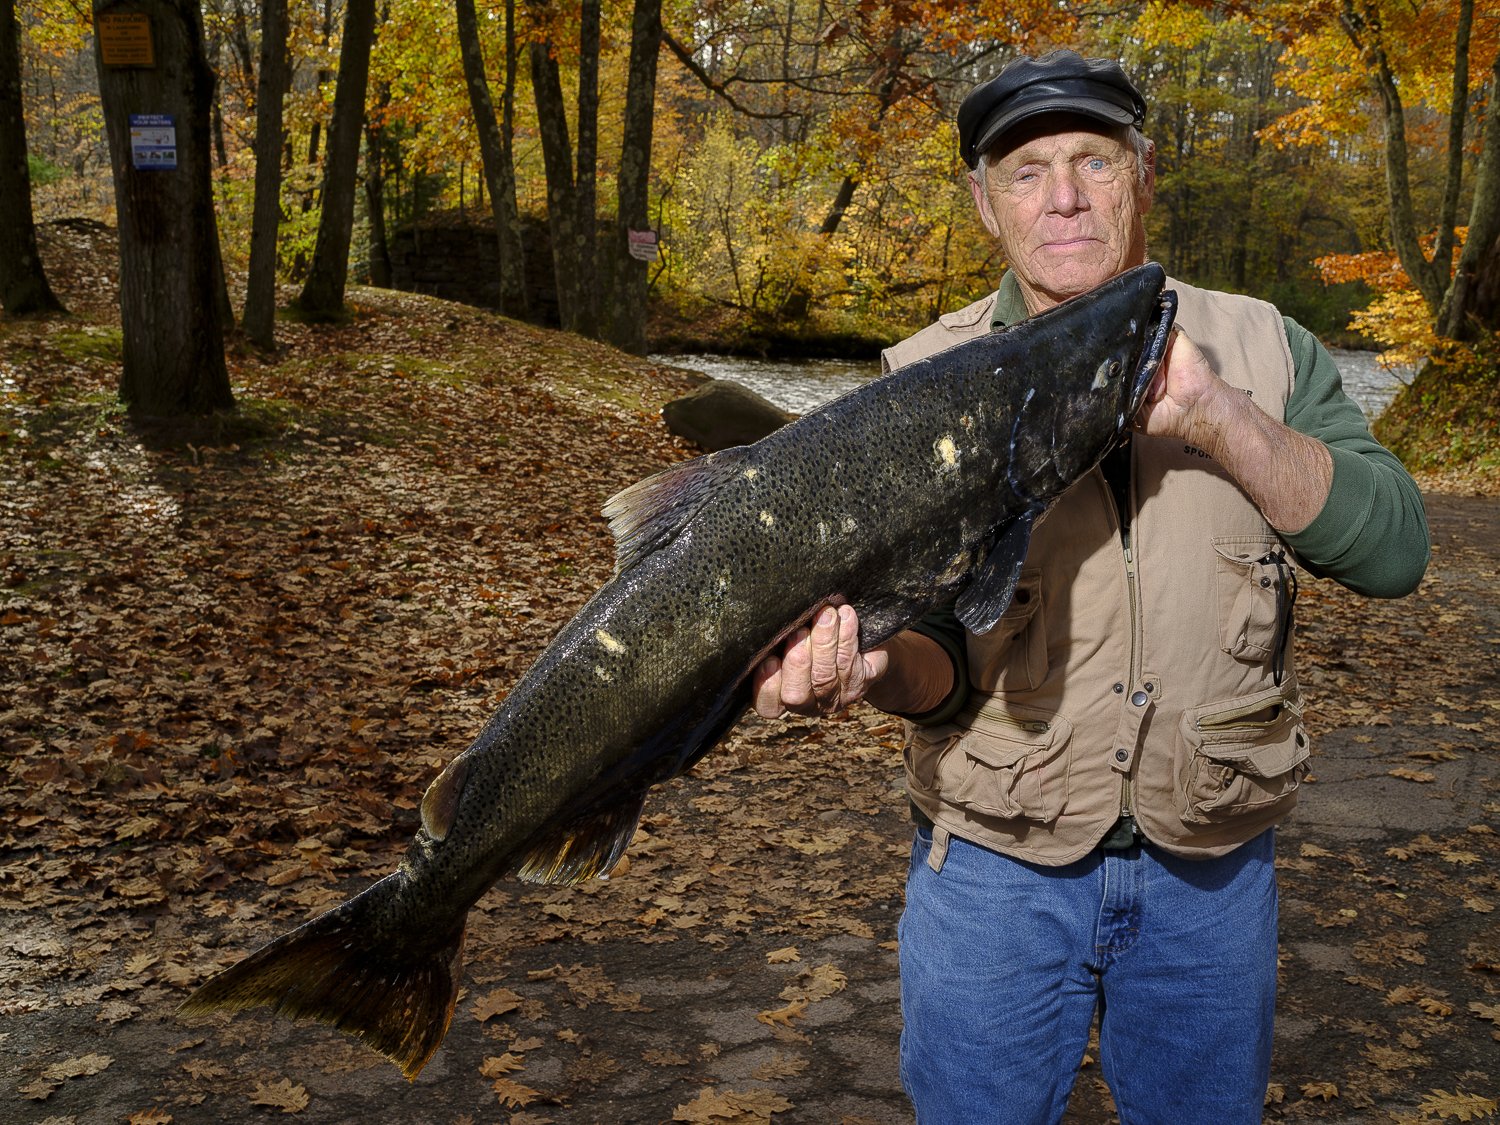  Herman Peterson, an antiques dealer of Richmondville, New York poses with a King Salmon at the Pineville River Landing.   Eric Geary, a local river guide from S.W.A.T Fishing said, “I mean, this is a blue-collar fishery. We have our doctors and lawy